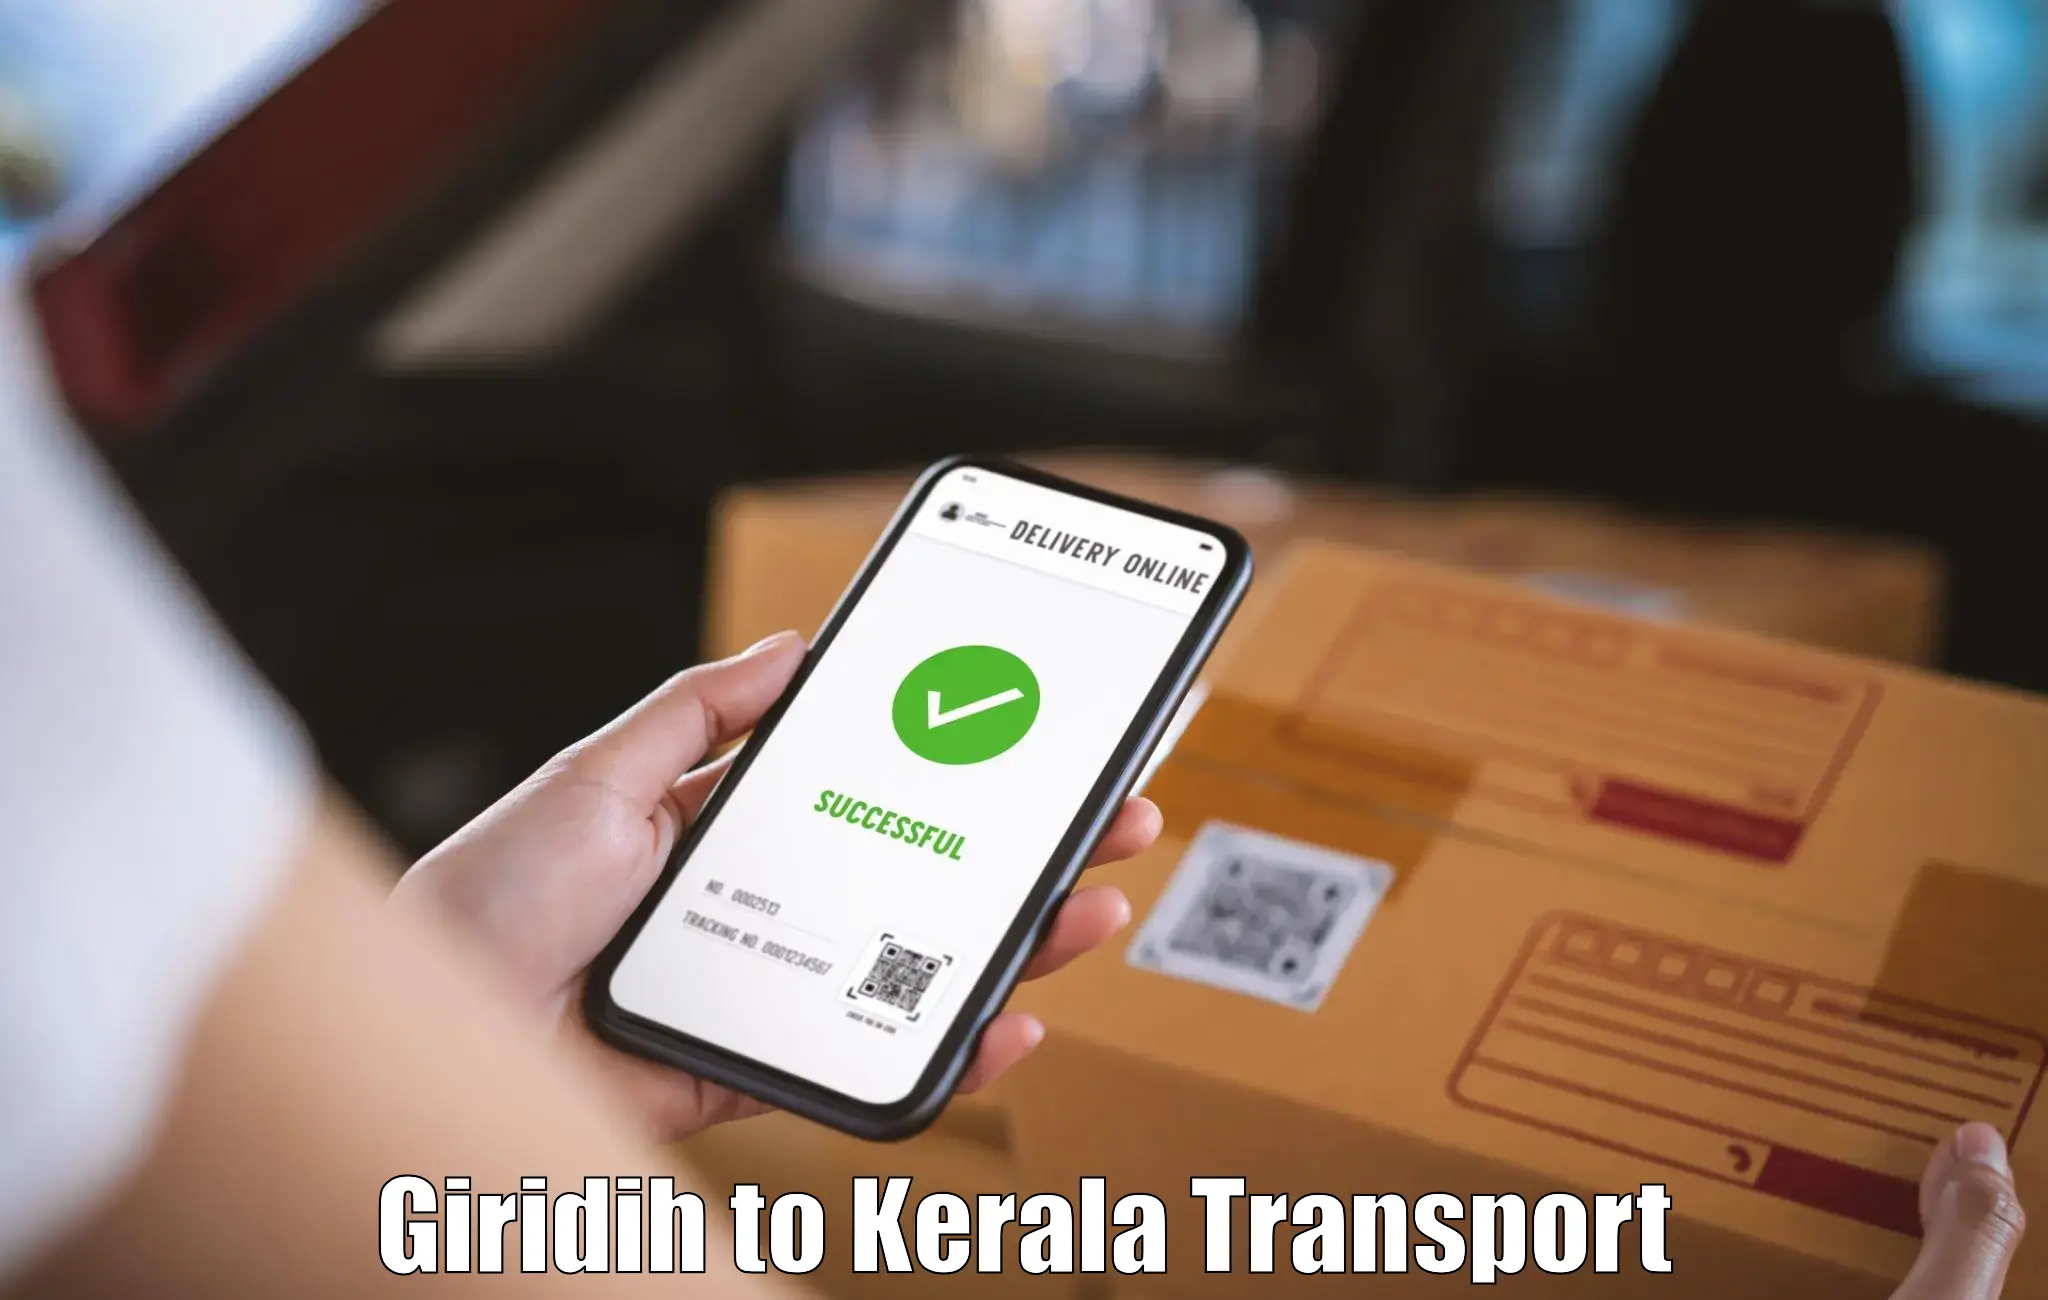 Two wheeler parcel service Giridih to Thrissur